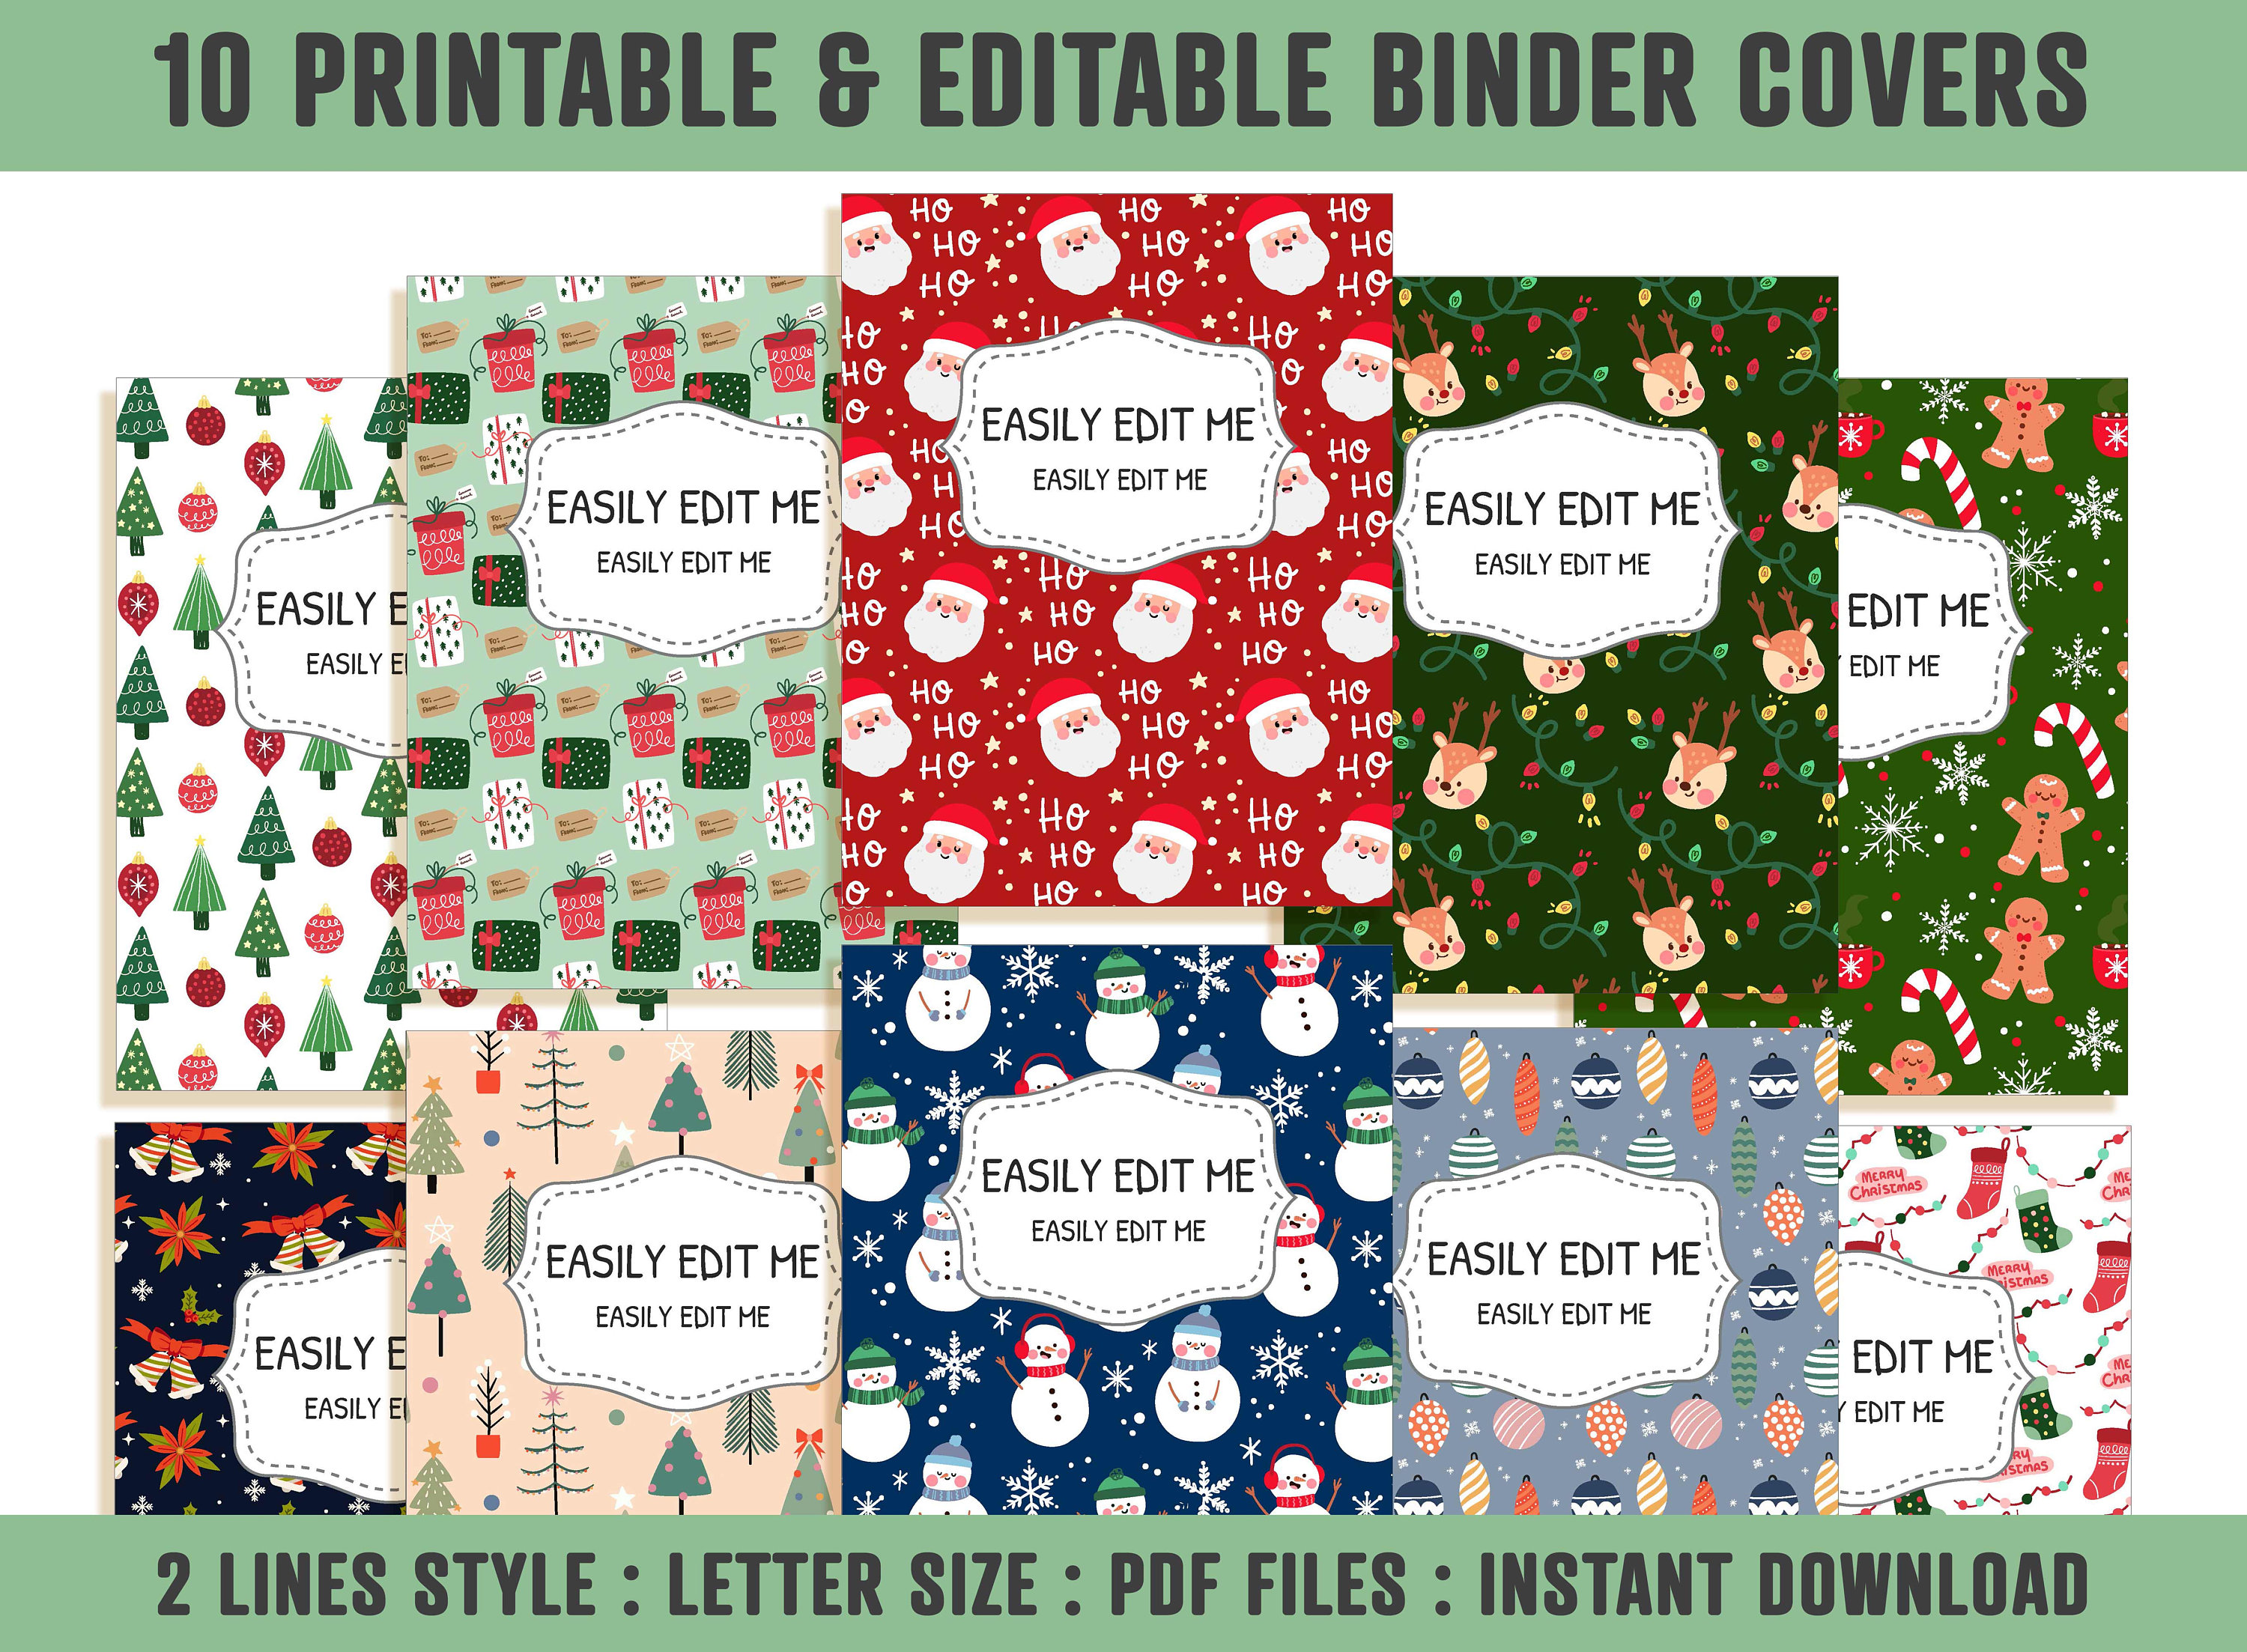 Binder Covers and Spines UPRINT – Schoolgirl Style